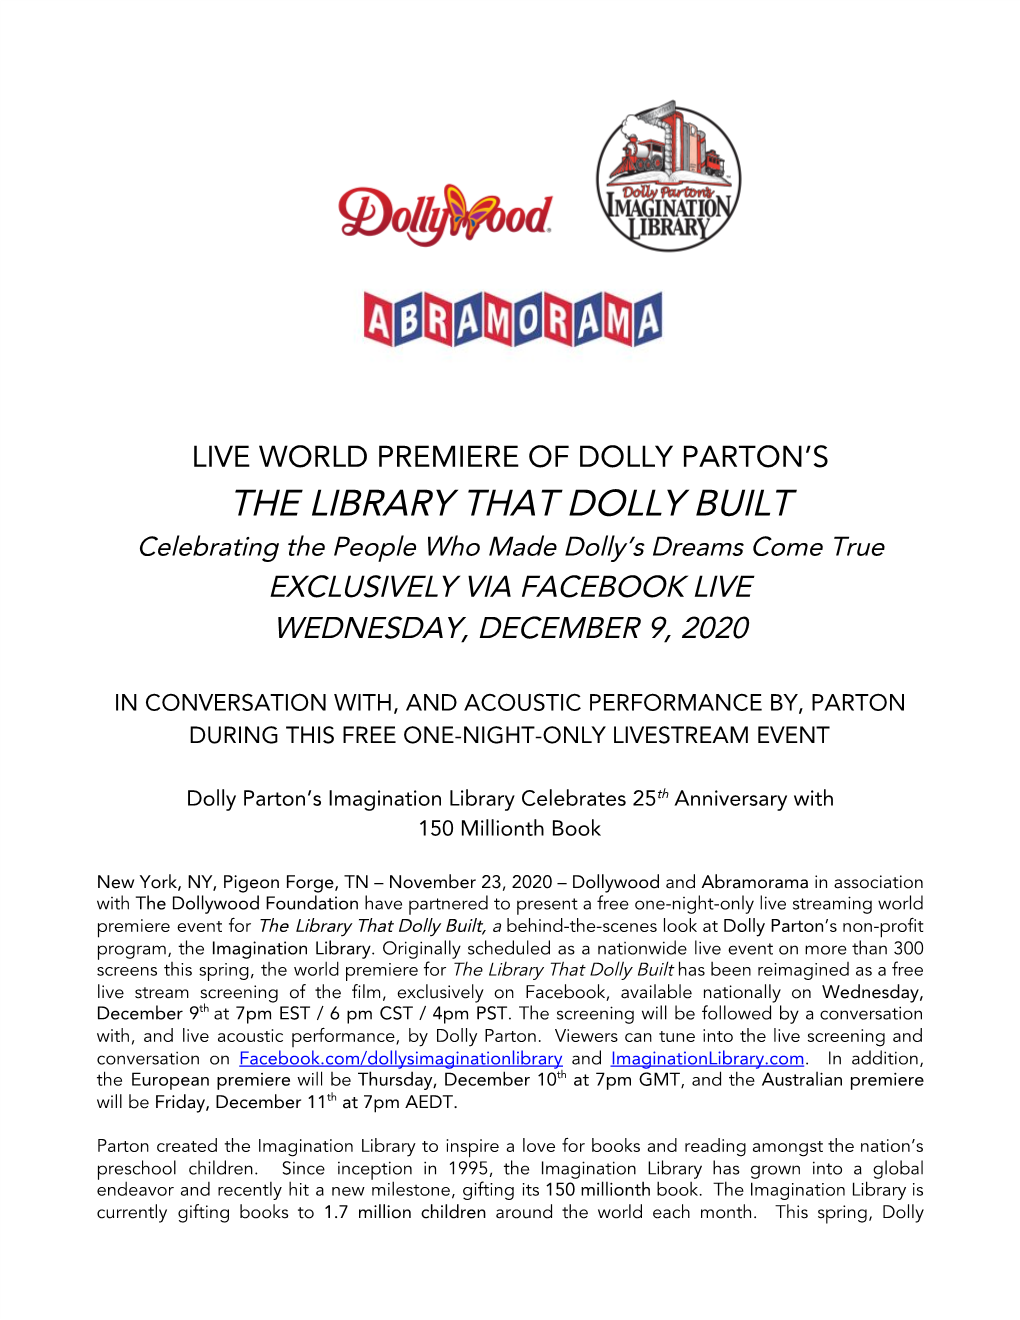 THE LIBRARY THAT DOLLY BUILT Celebrating the People Who Made Dolly’S Dreams Come True EXCLUSIVELY VIA FACEBOOK LIVE WEDNESDAY, DECEMBER 9, 2020